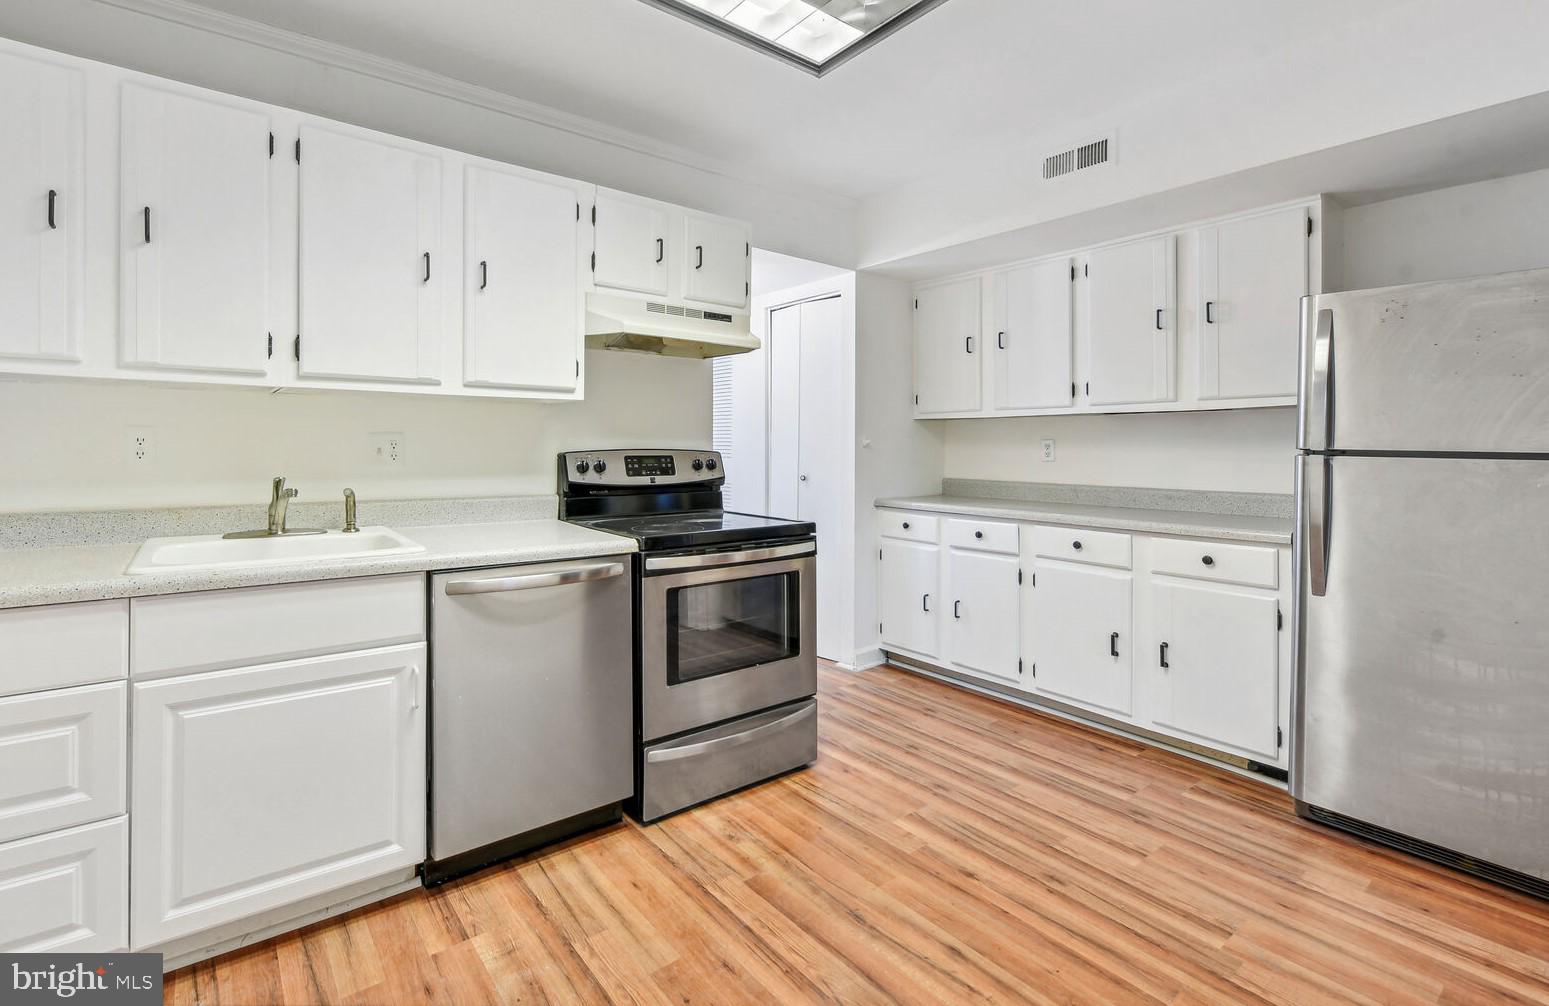 a kitchen with white cabinets white stainless steel appliances and sink